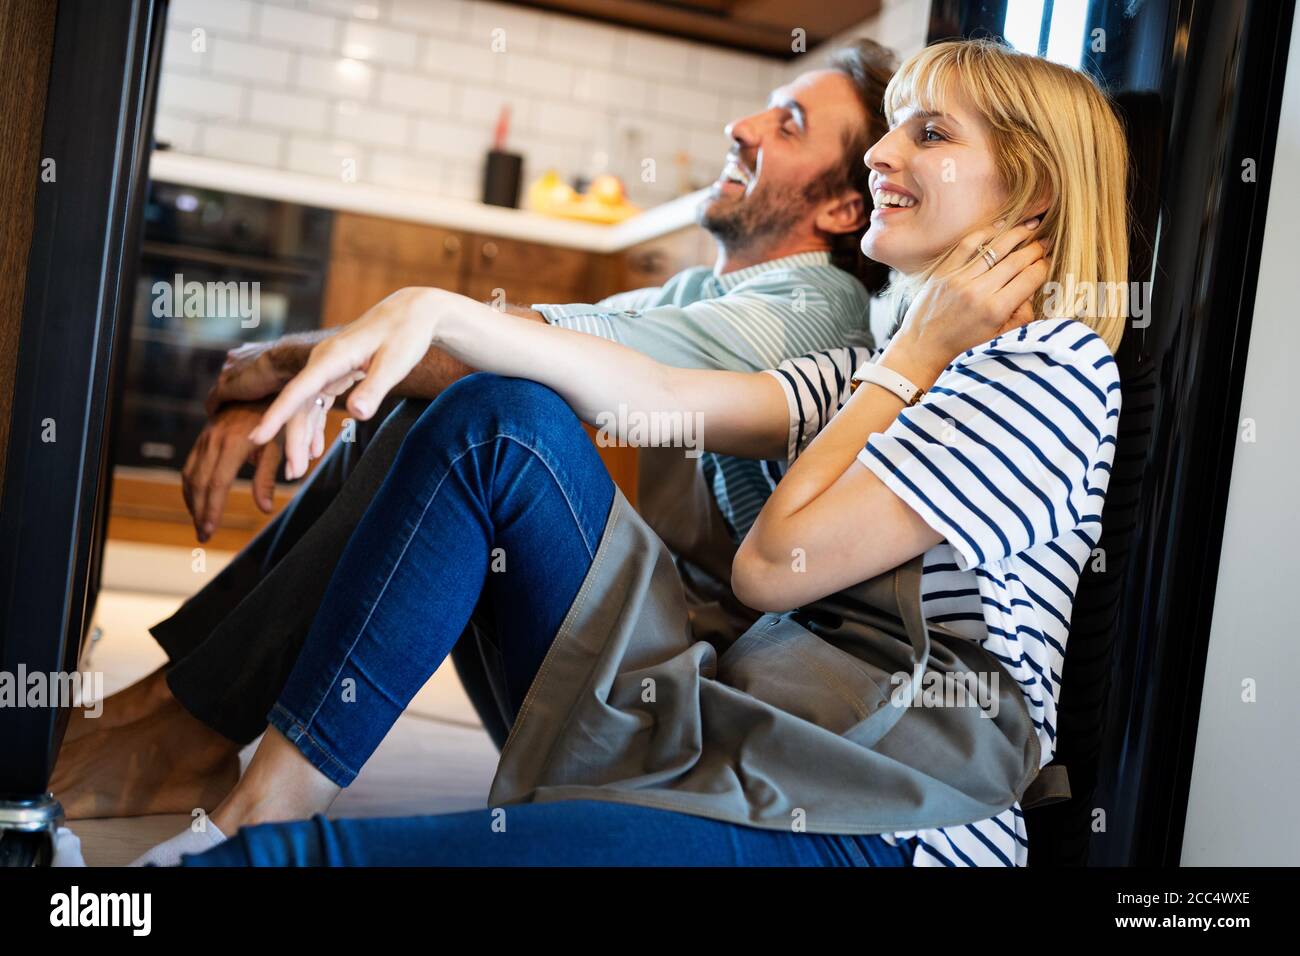 Young happy tired couple sitting on kitchen floor after cooking Stock Photo